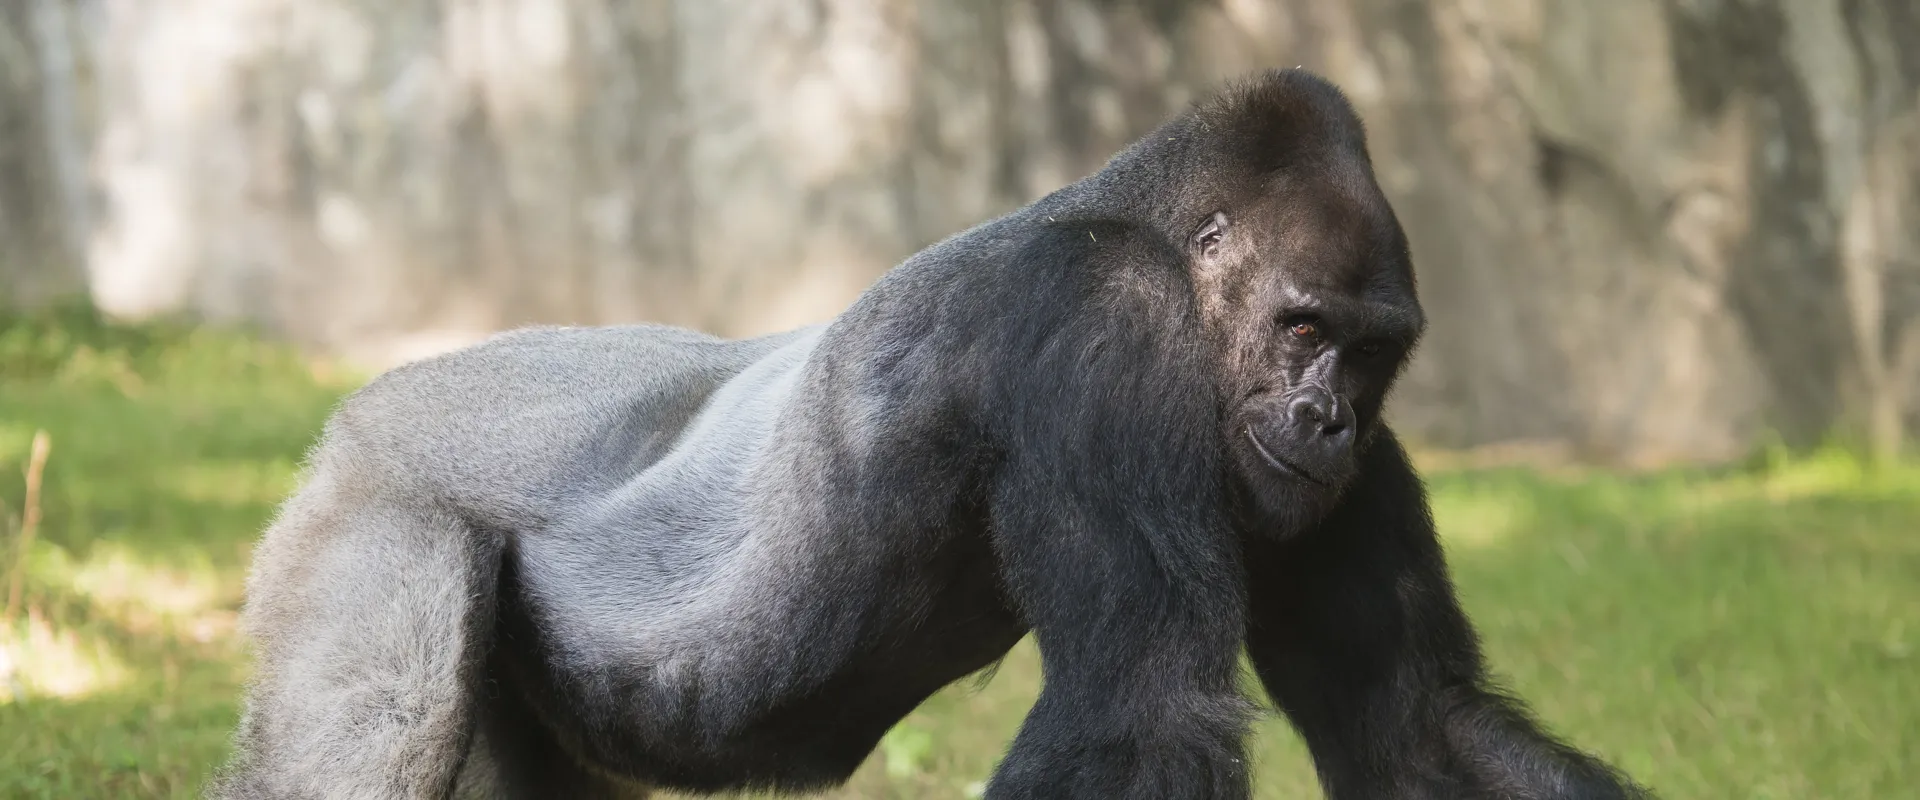 Zoo Research: Growing with Gorillas